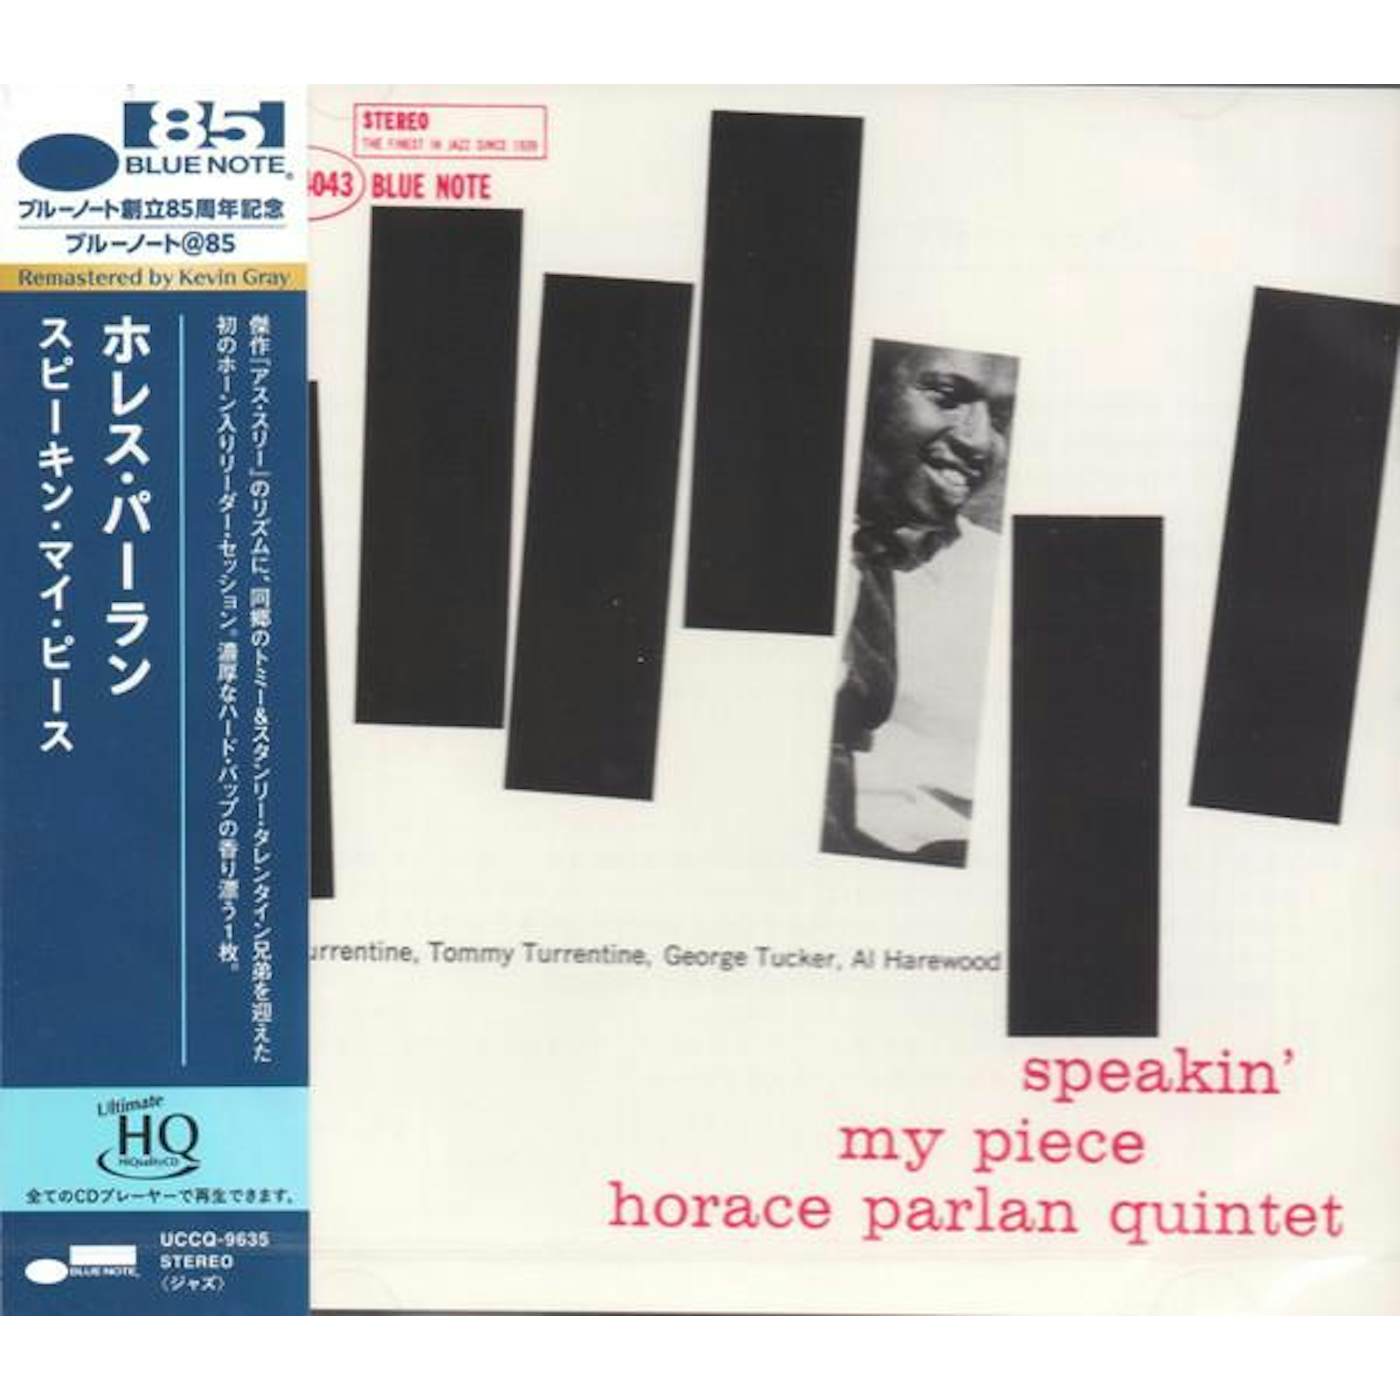 Horace Parlan SPEAKIN' MY PIECE (UHQCD) (BLUE NOTE 85TH ANNIVERSARY EDITION/REMASTERED BY KEVIN GRAY) CD